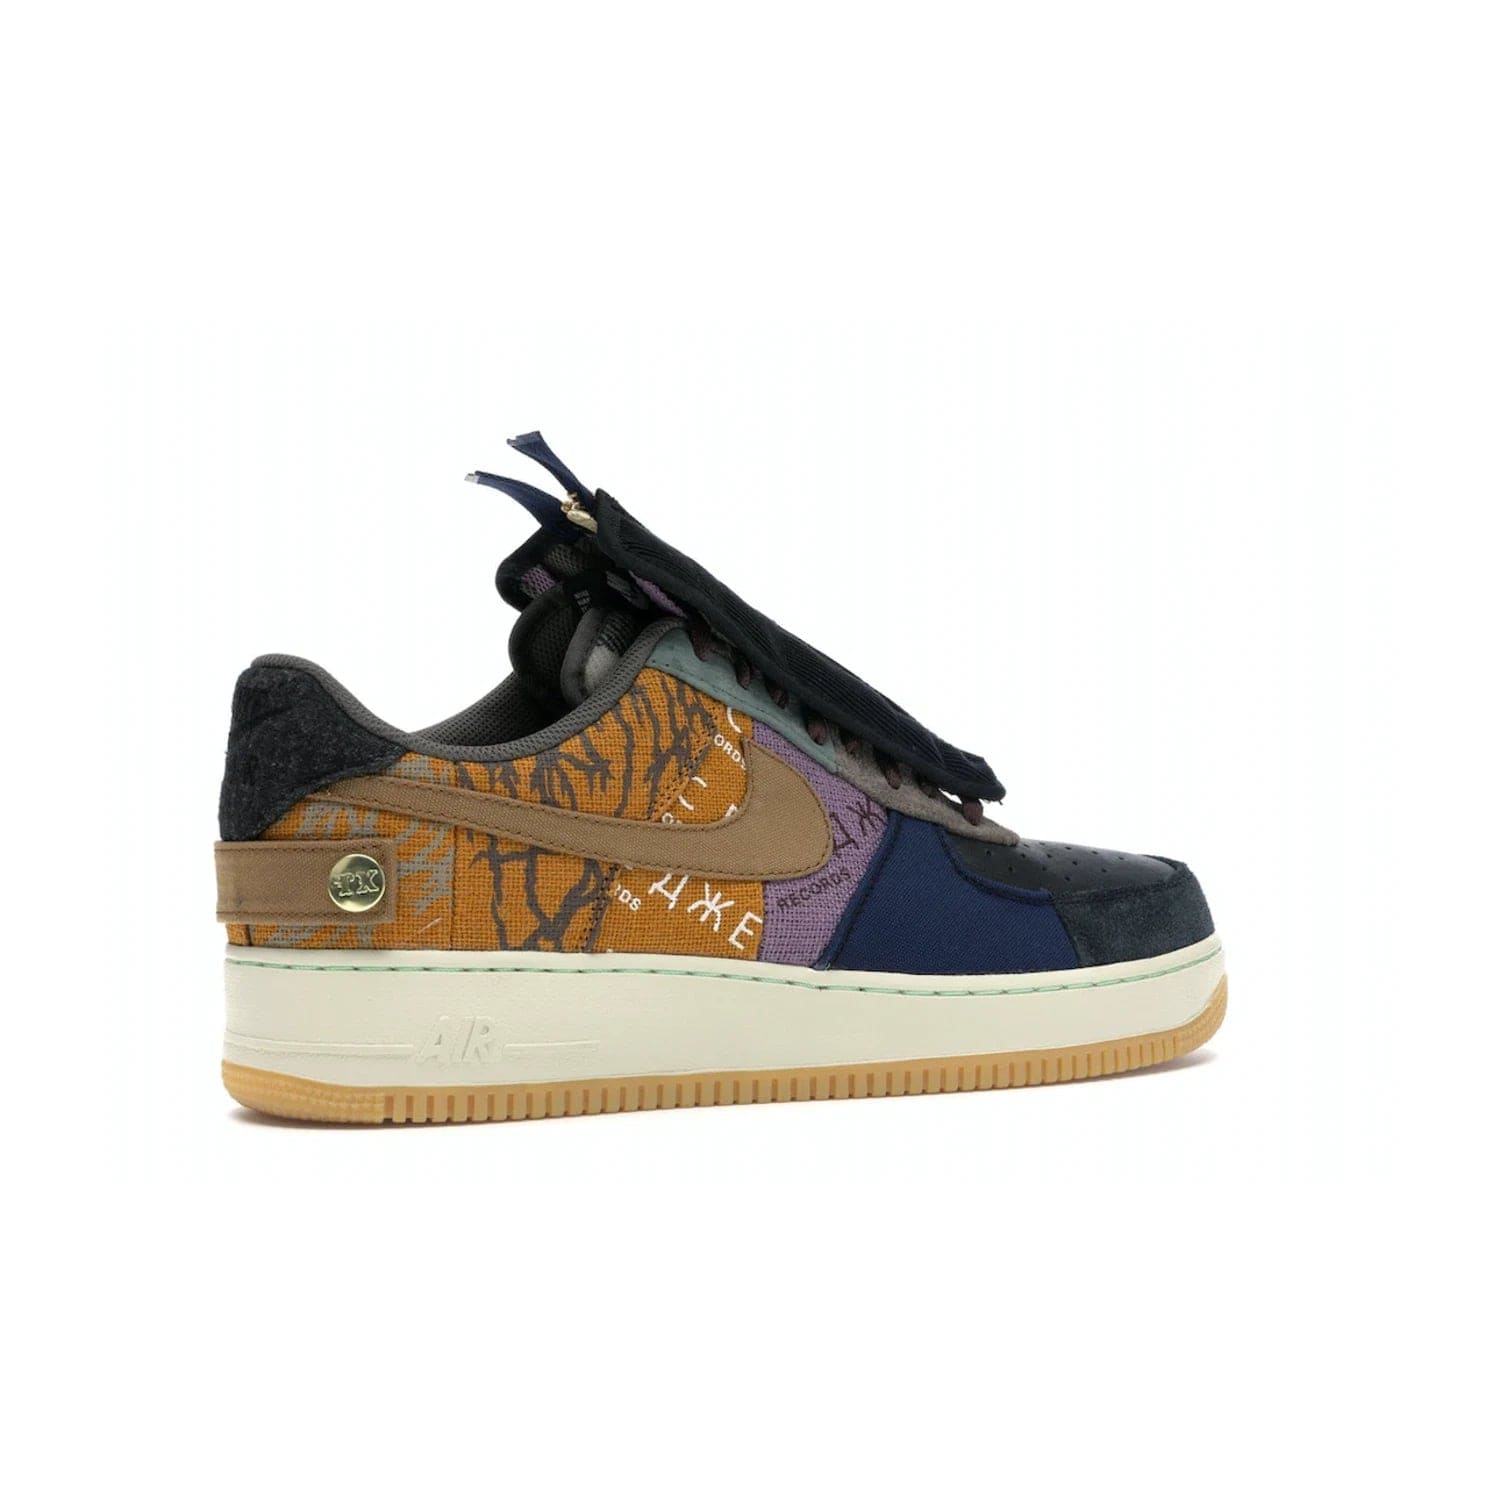 Nike Air Force 1 Low Travis Scott Cactus Jack - Image 34 - Only at www.BallersClubKickz.com - The Nike Air Force 1 Low Travis Scott Cactus Jack features a unique, multi-colored patchwork upper with muted bronze and fossil accents. Includes detachable lace cover, brass zipper, and Cactus Jack insignias. A sail midsole, gum rubber outsole complete the eye-catching design. Perfect for comfort and style with unexpected touches of detail.